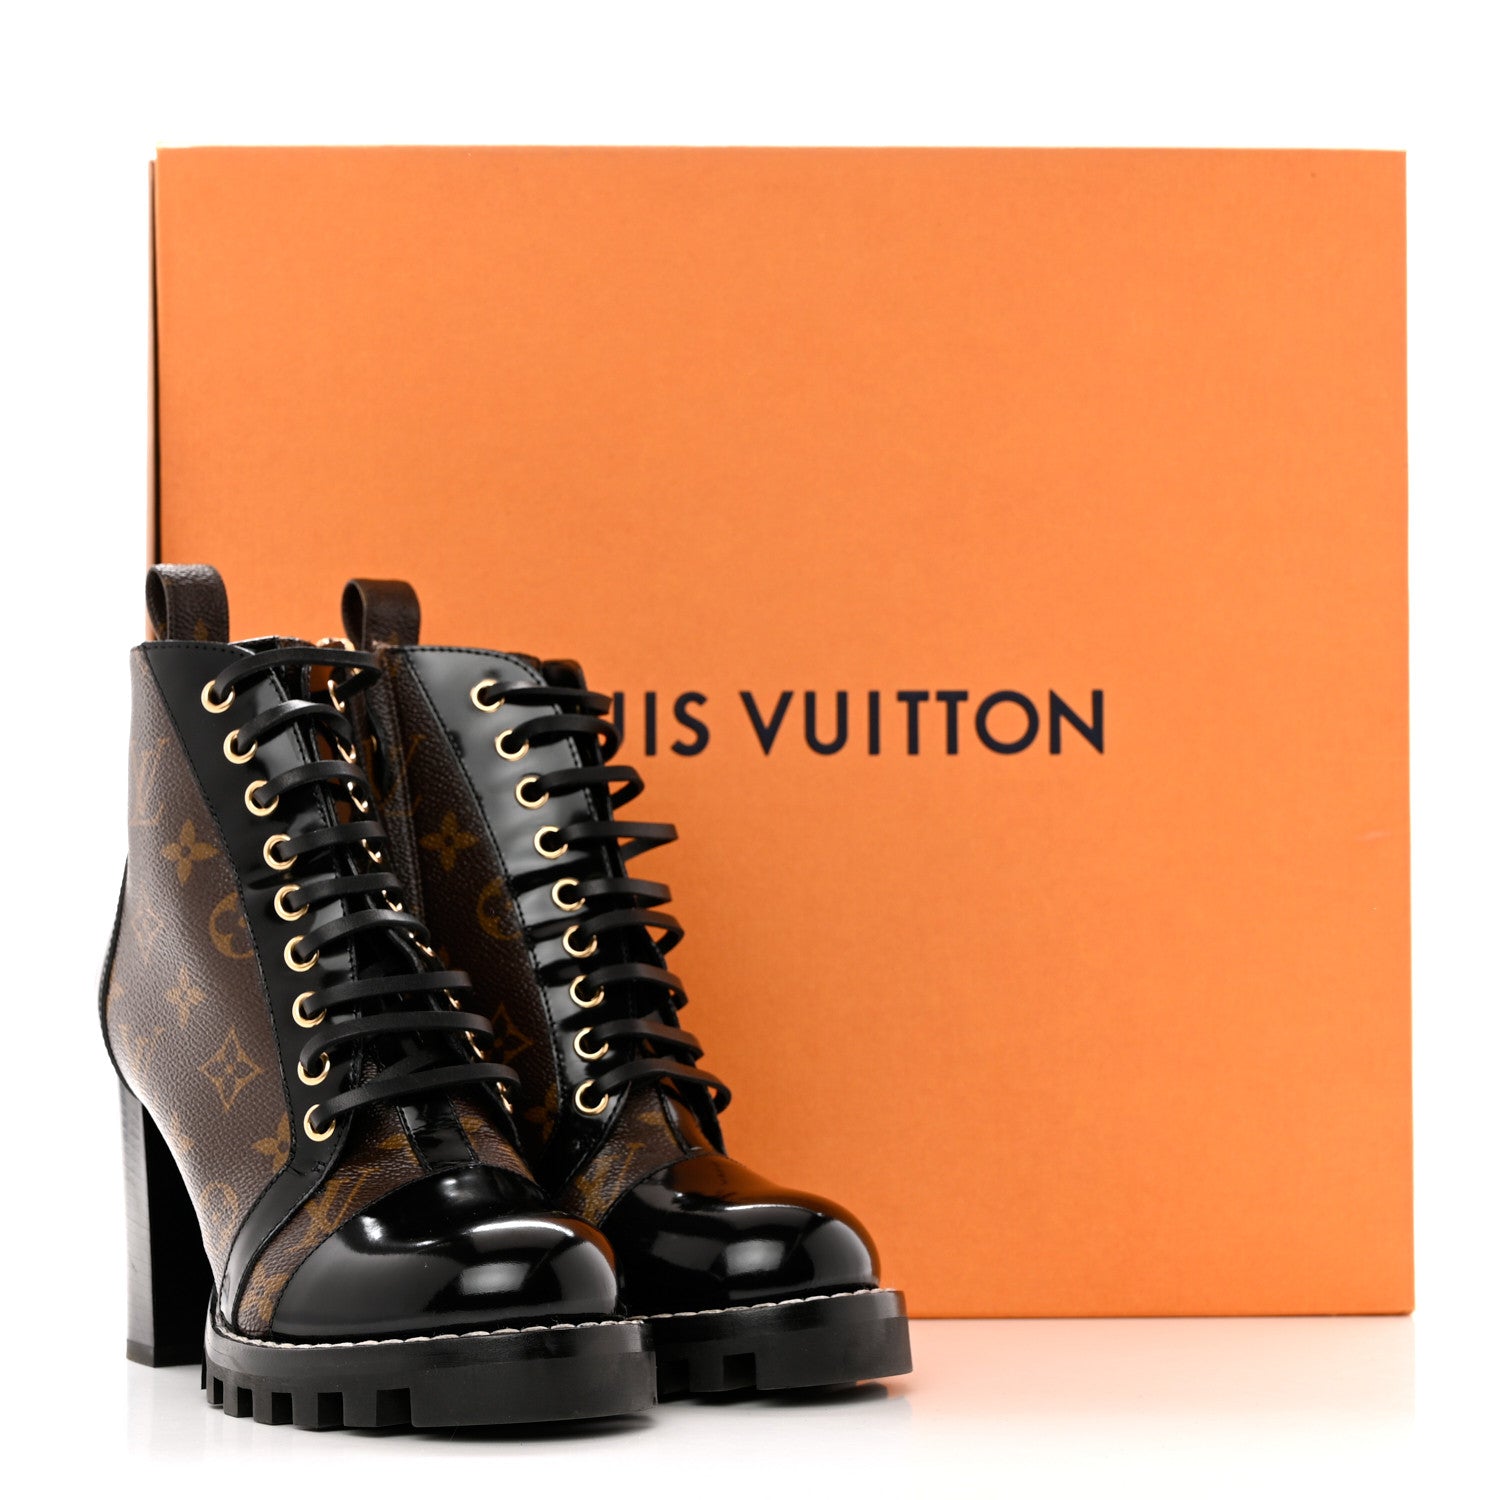 LOUIS VUITTON Suede Calfskin Monogram Star Trail Ankle Boot for